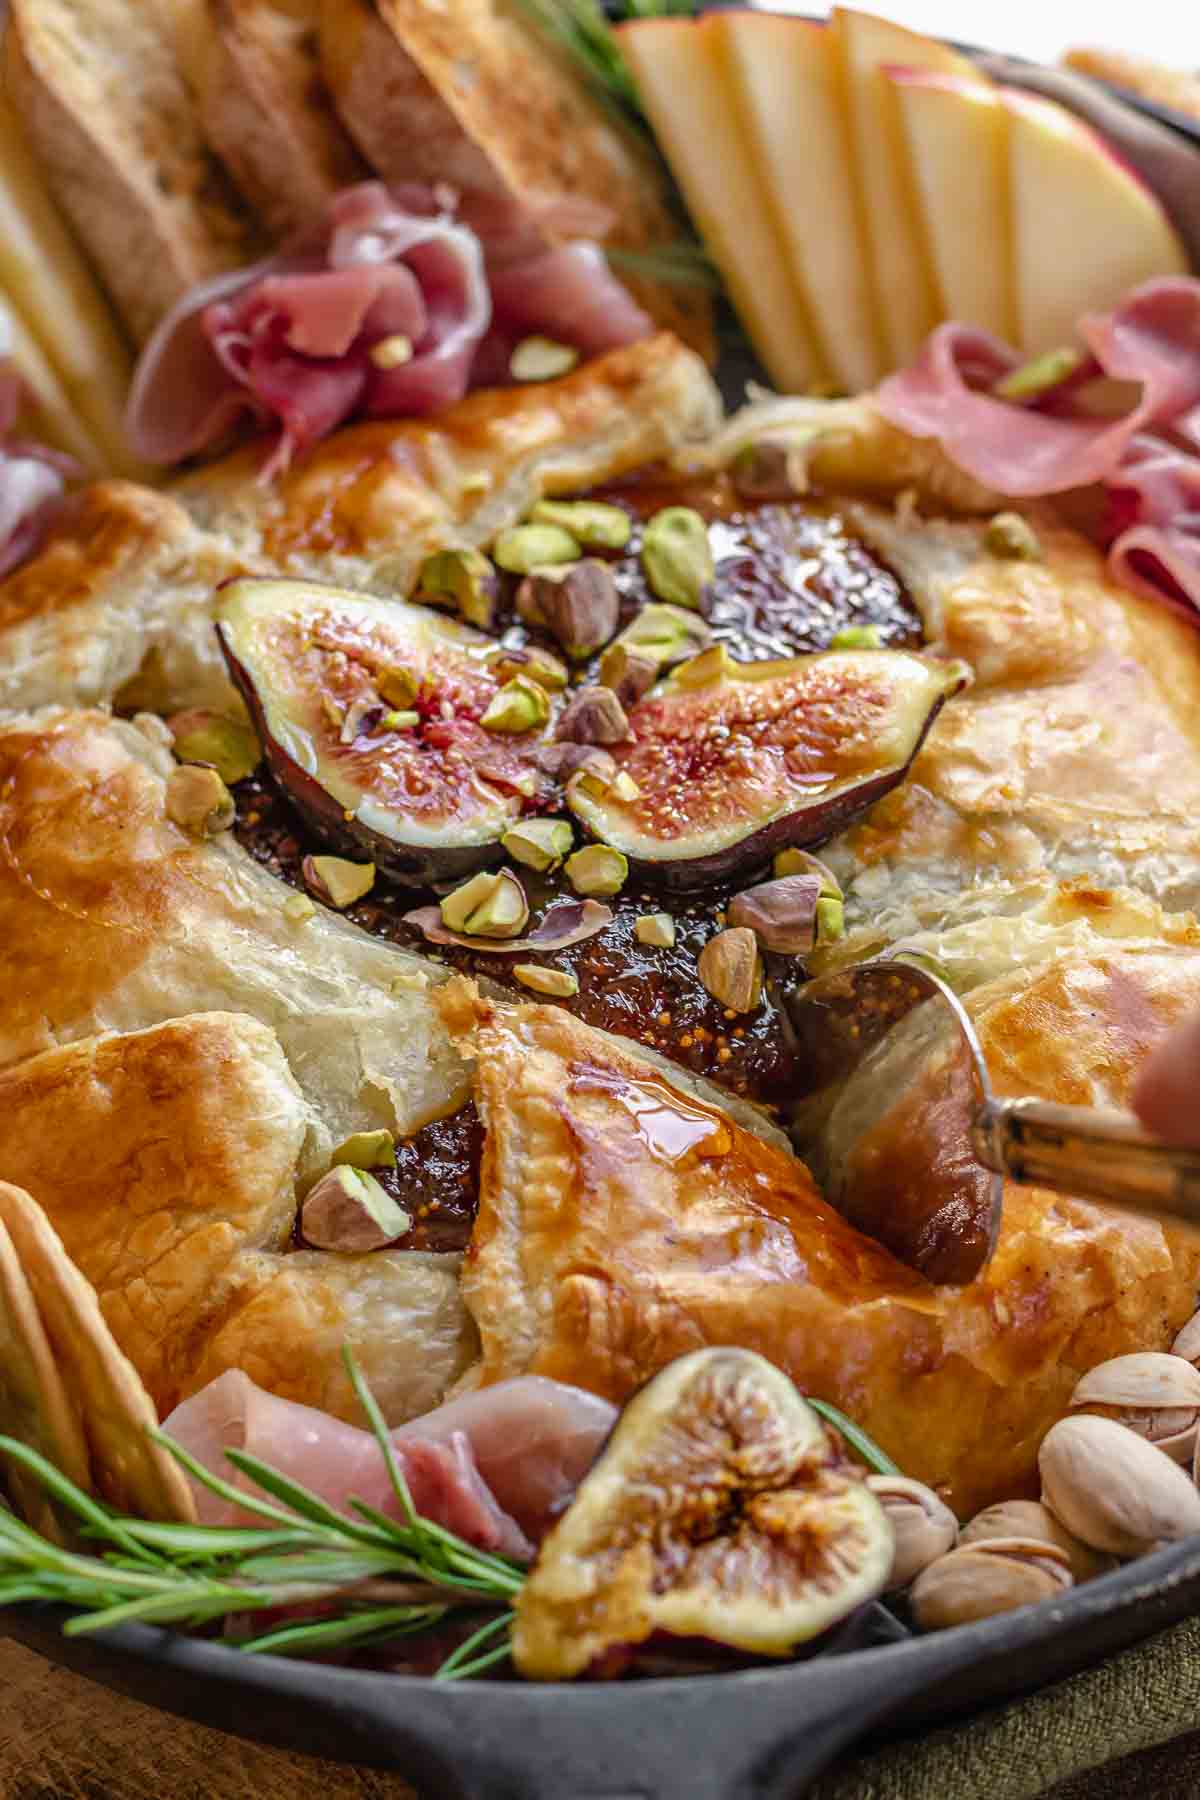 Slicing into a baked brie with figs on top.